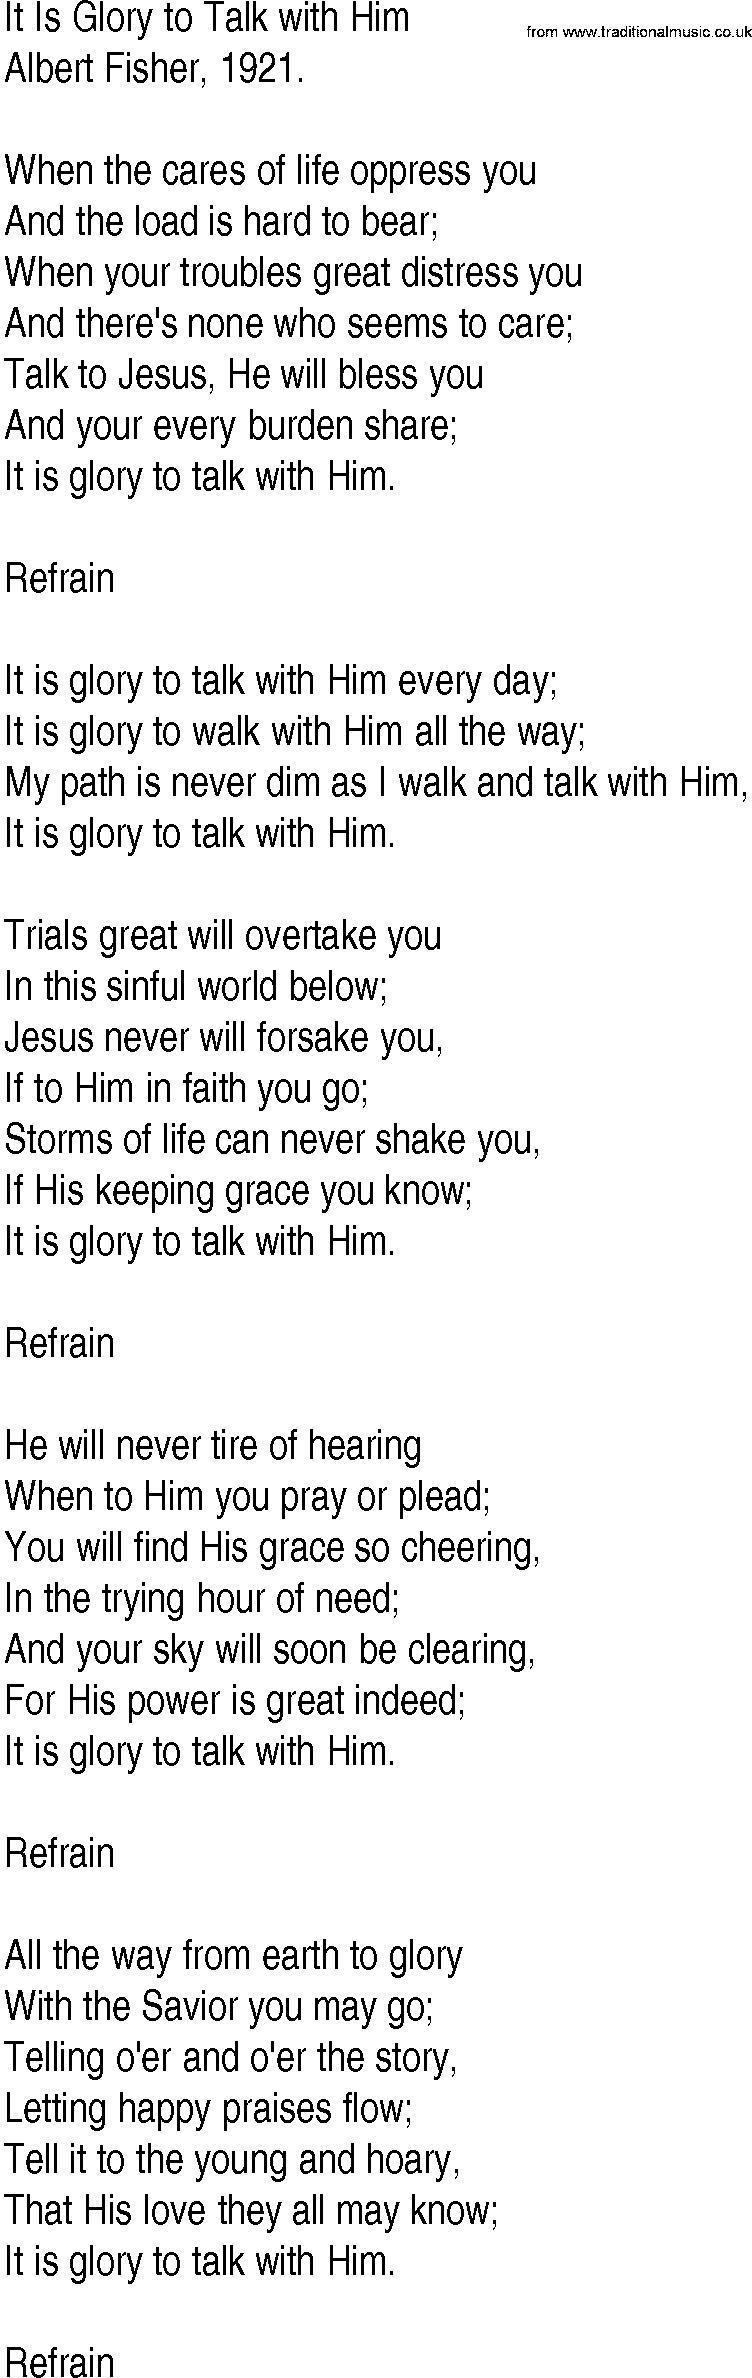 Hymn and Gospel Song: It Is Glory to Talk with Him by Albert Fisher lyrics